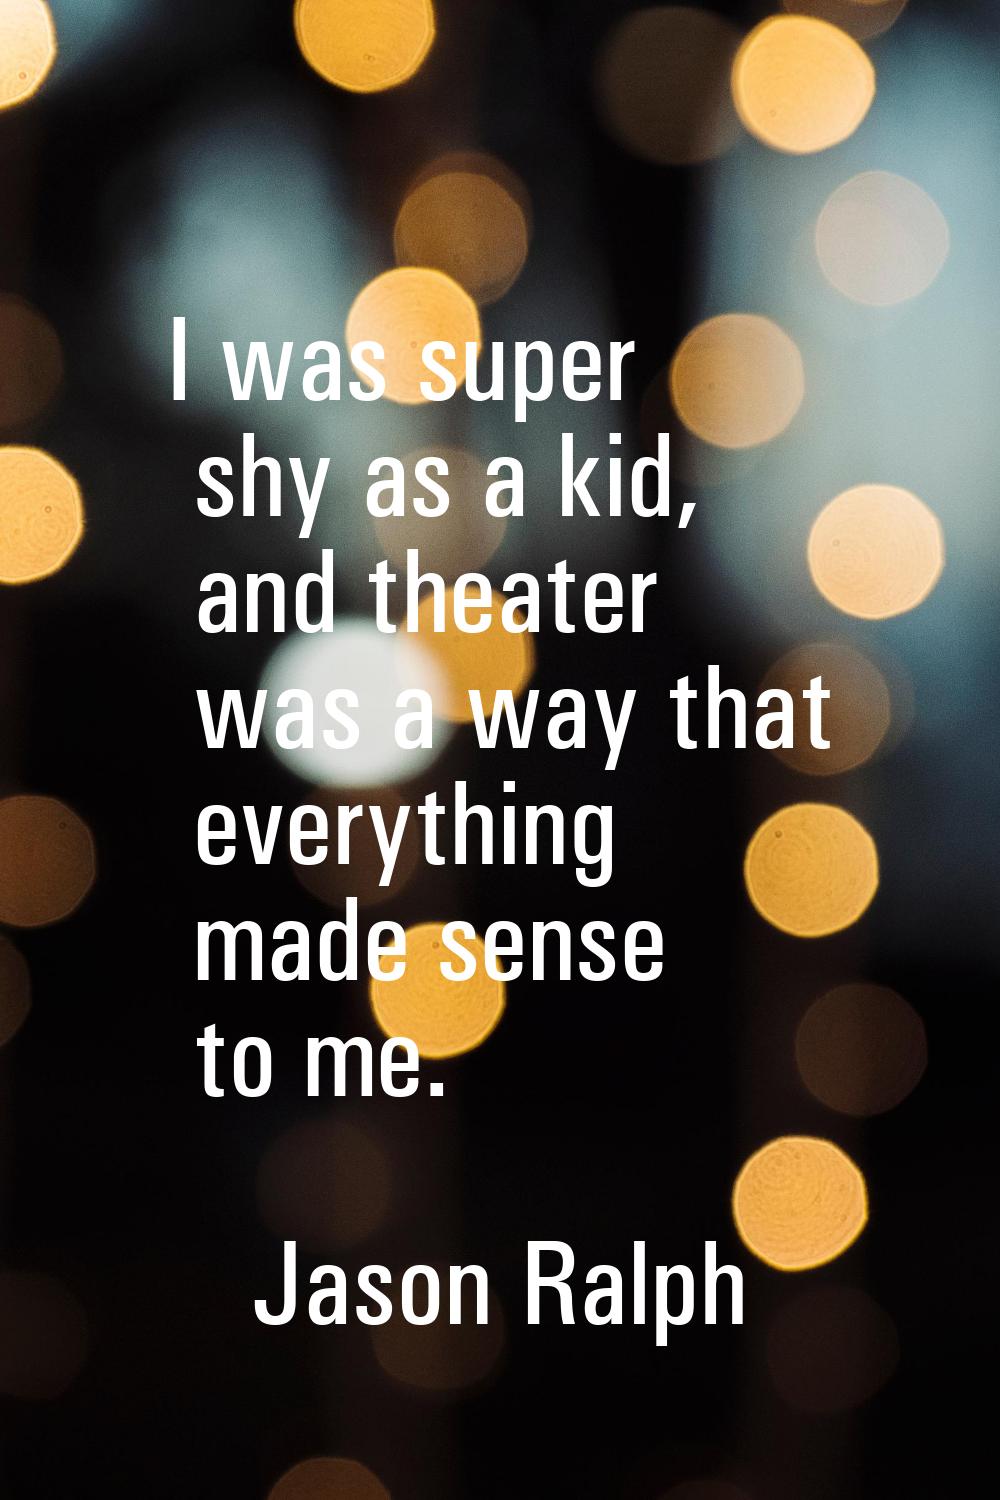 I was super shy as a kid, and theater was a way that everything made sense to me.